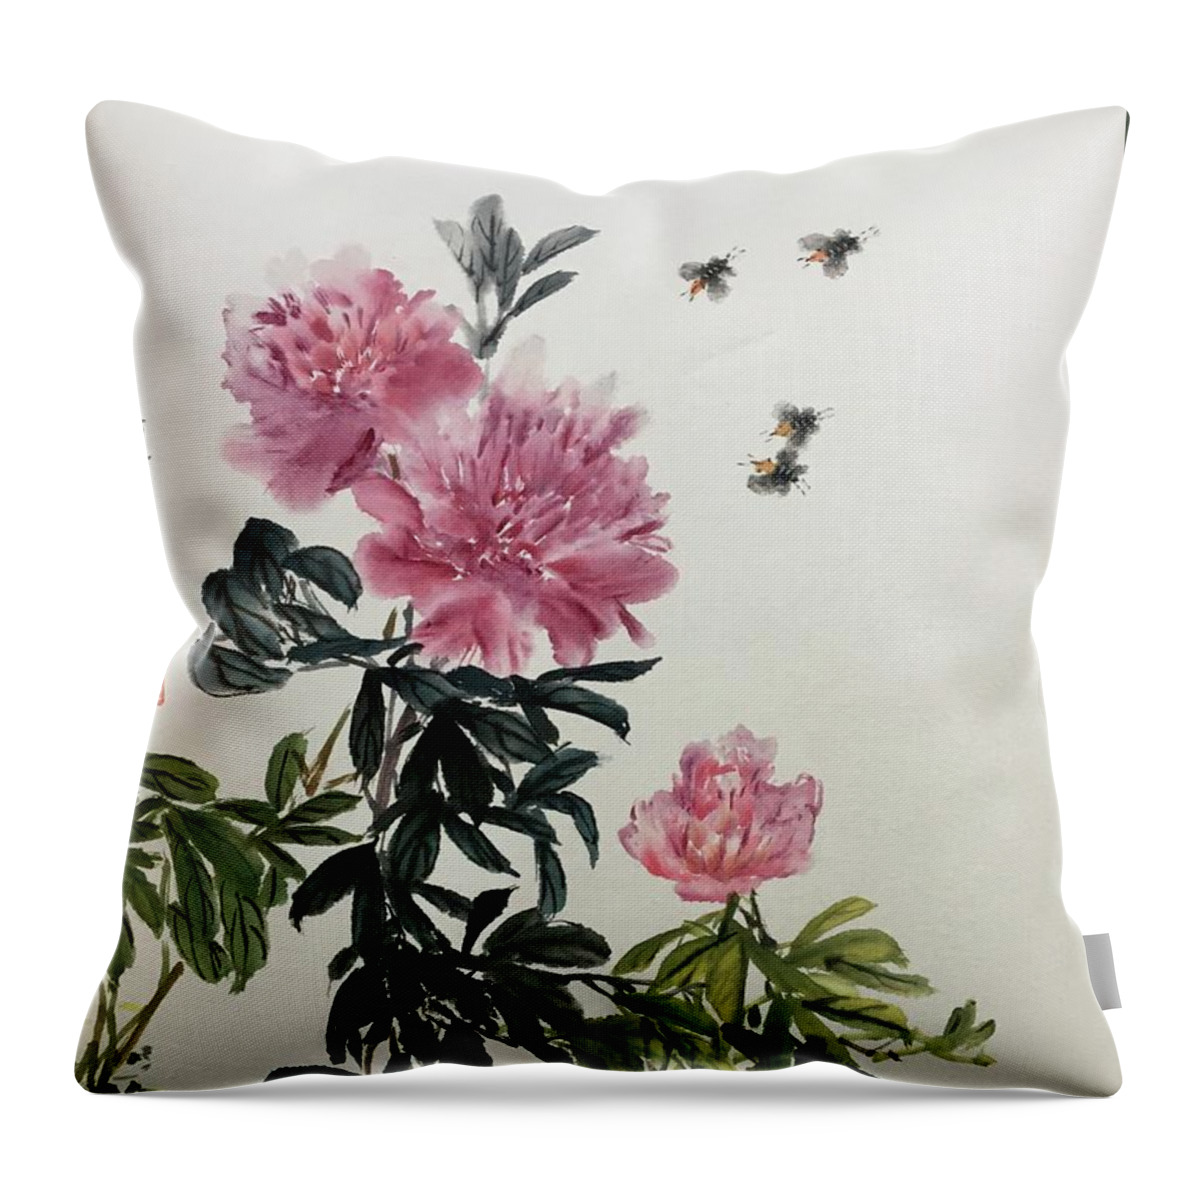 Peony Flowers Throw Pillow featuring the painting Depend On Each Other - 2 by Carmen Lam